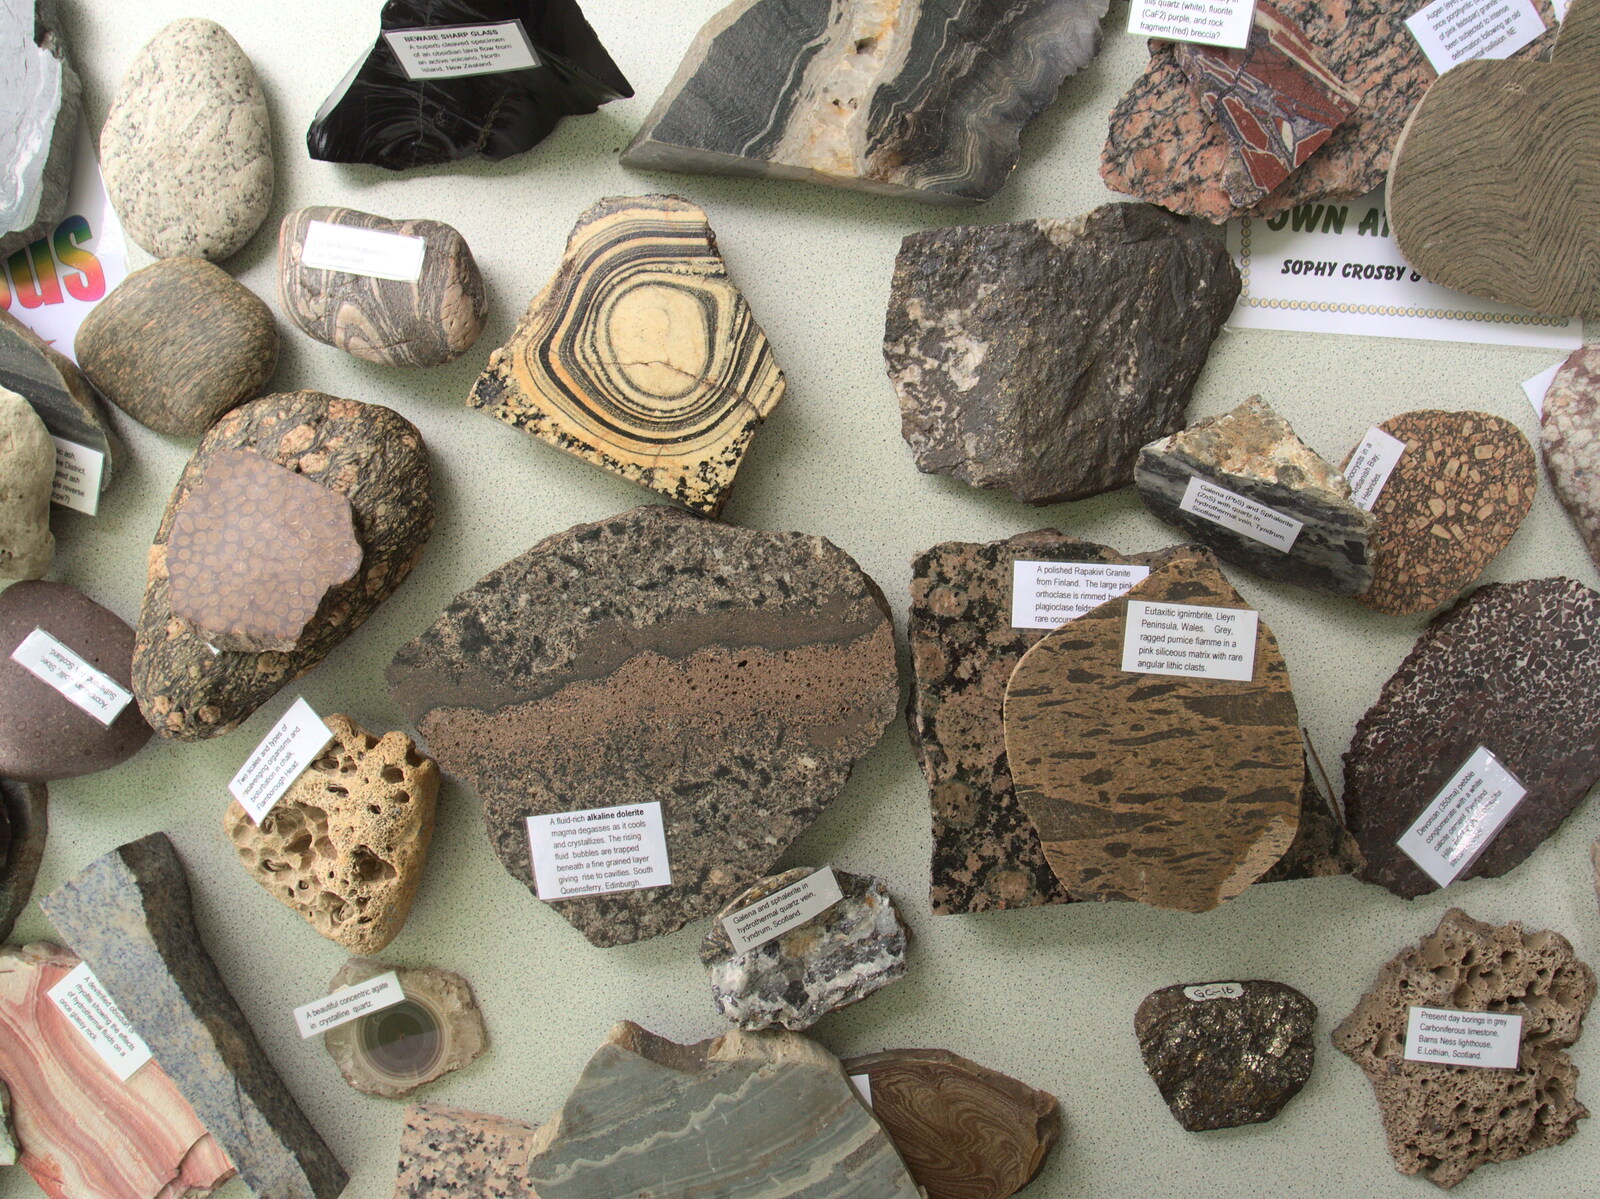 A nice collection of rock specimens from Latitude Festival, Henham Park, Southwold, Suffolk - 17th July 2014